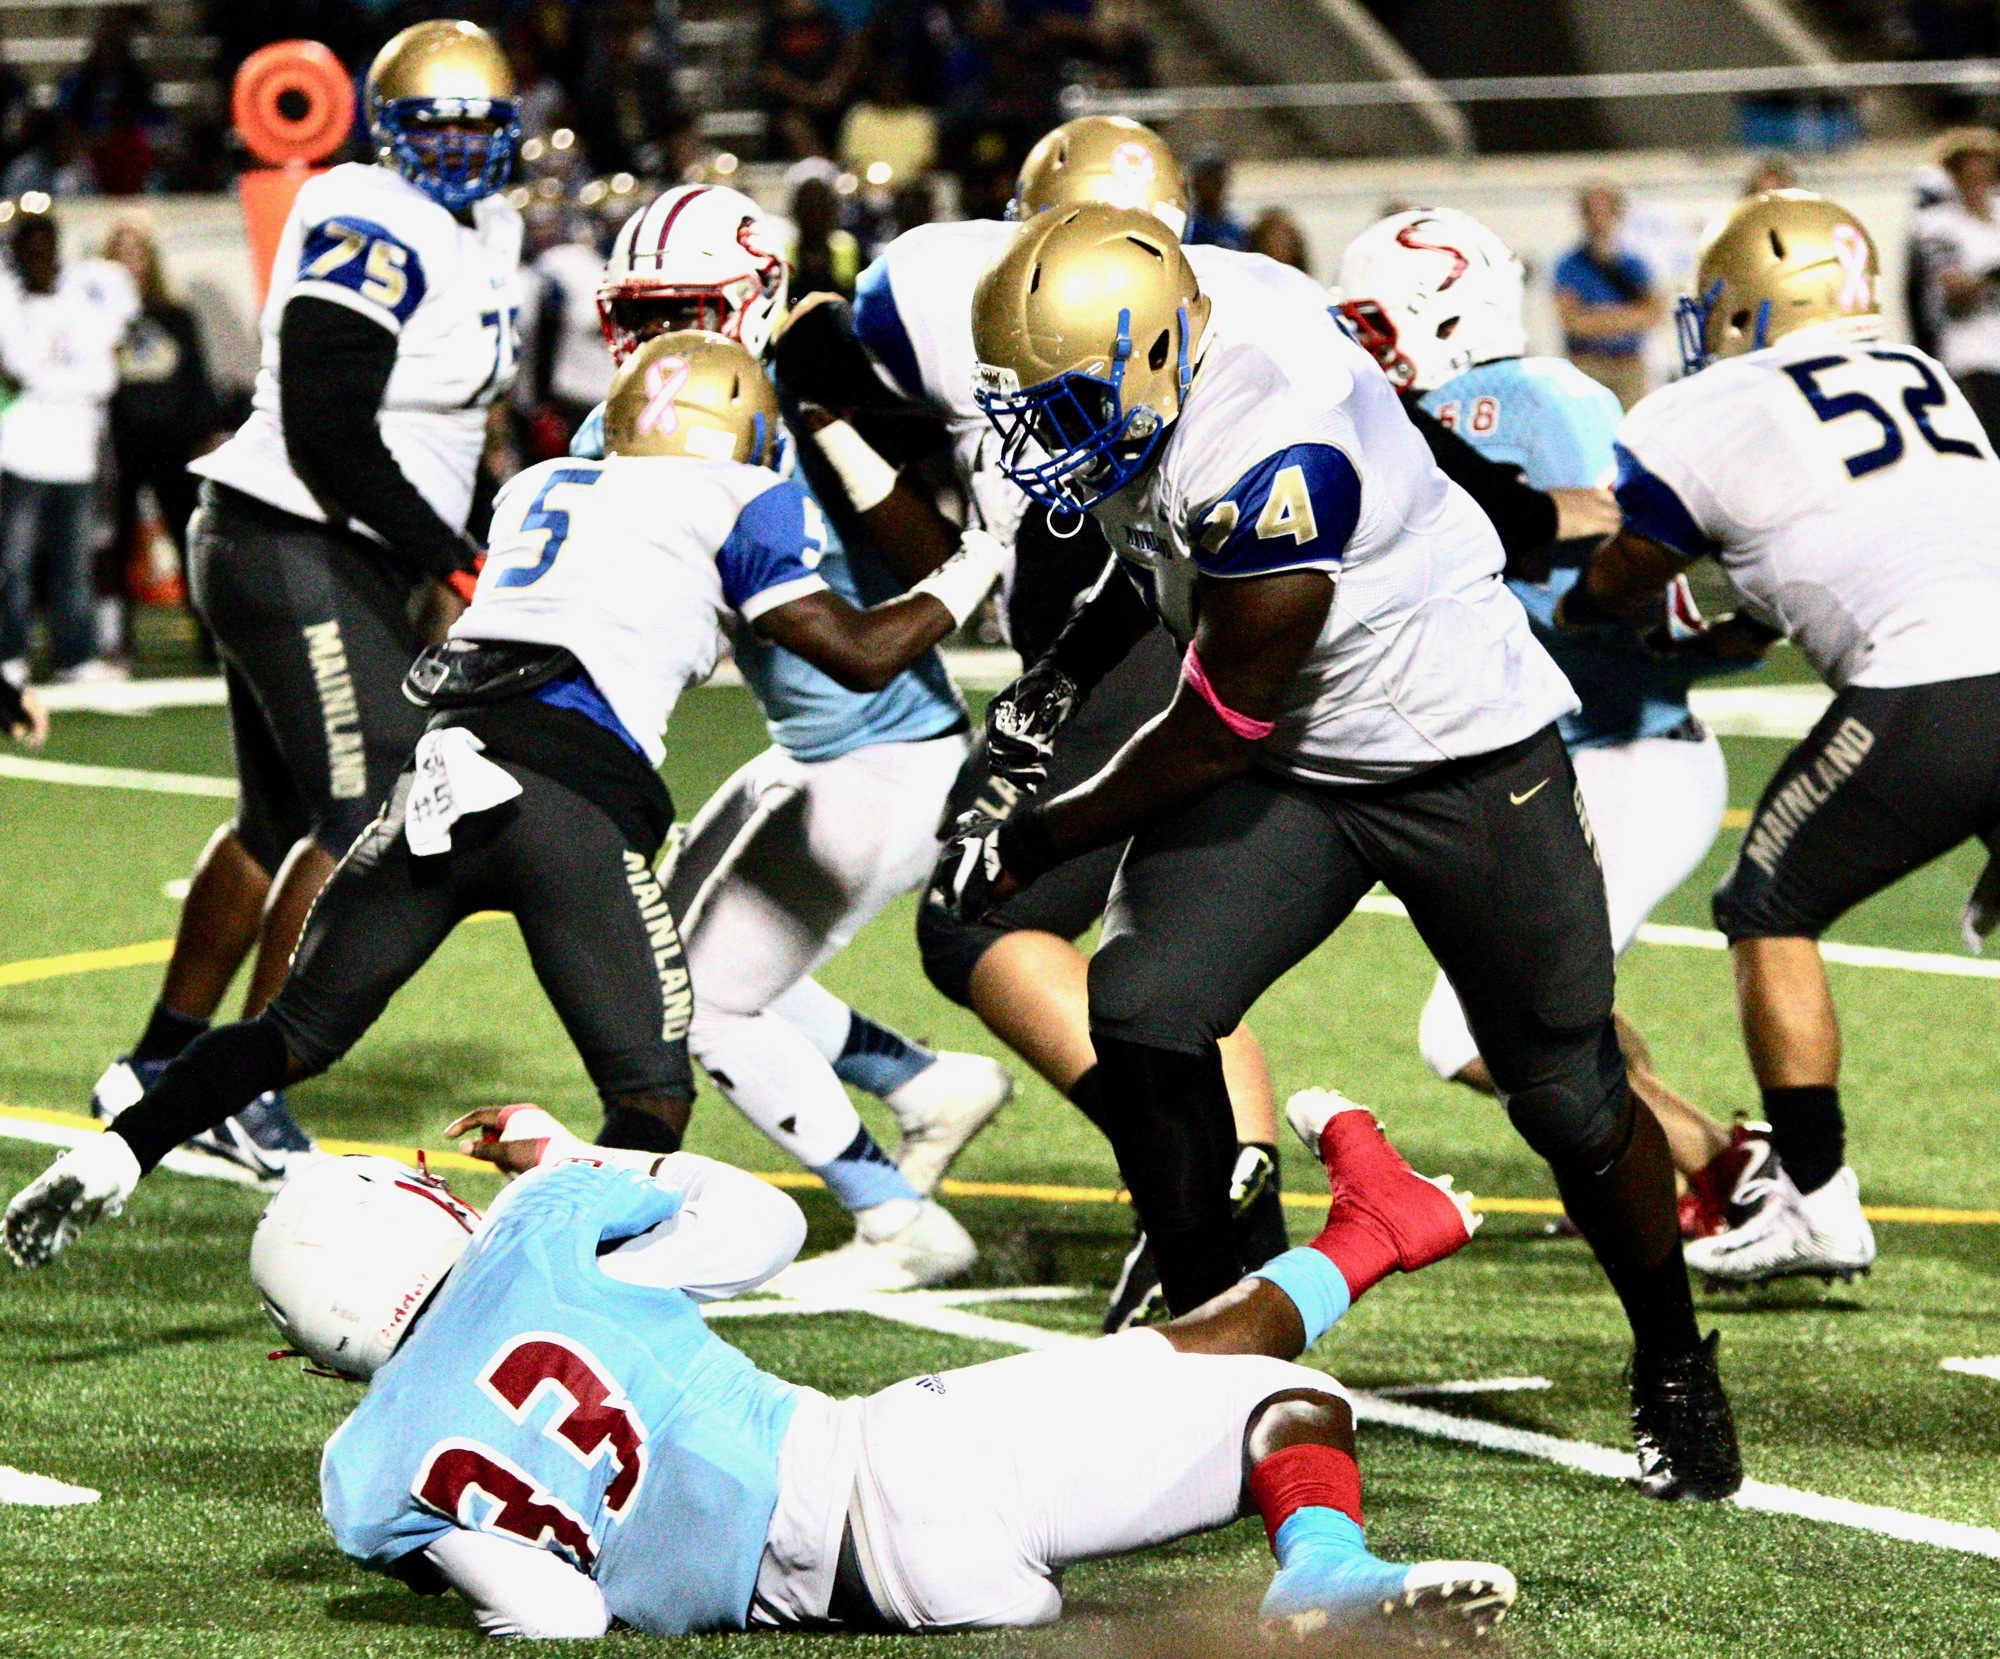 Mainland offensive lineman Adonis Boone throws down a defender. File Photo